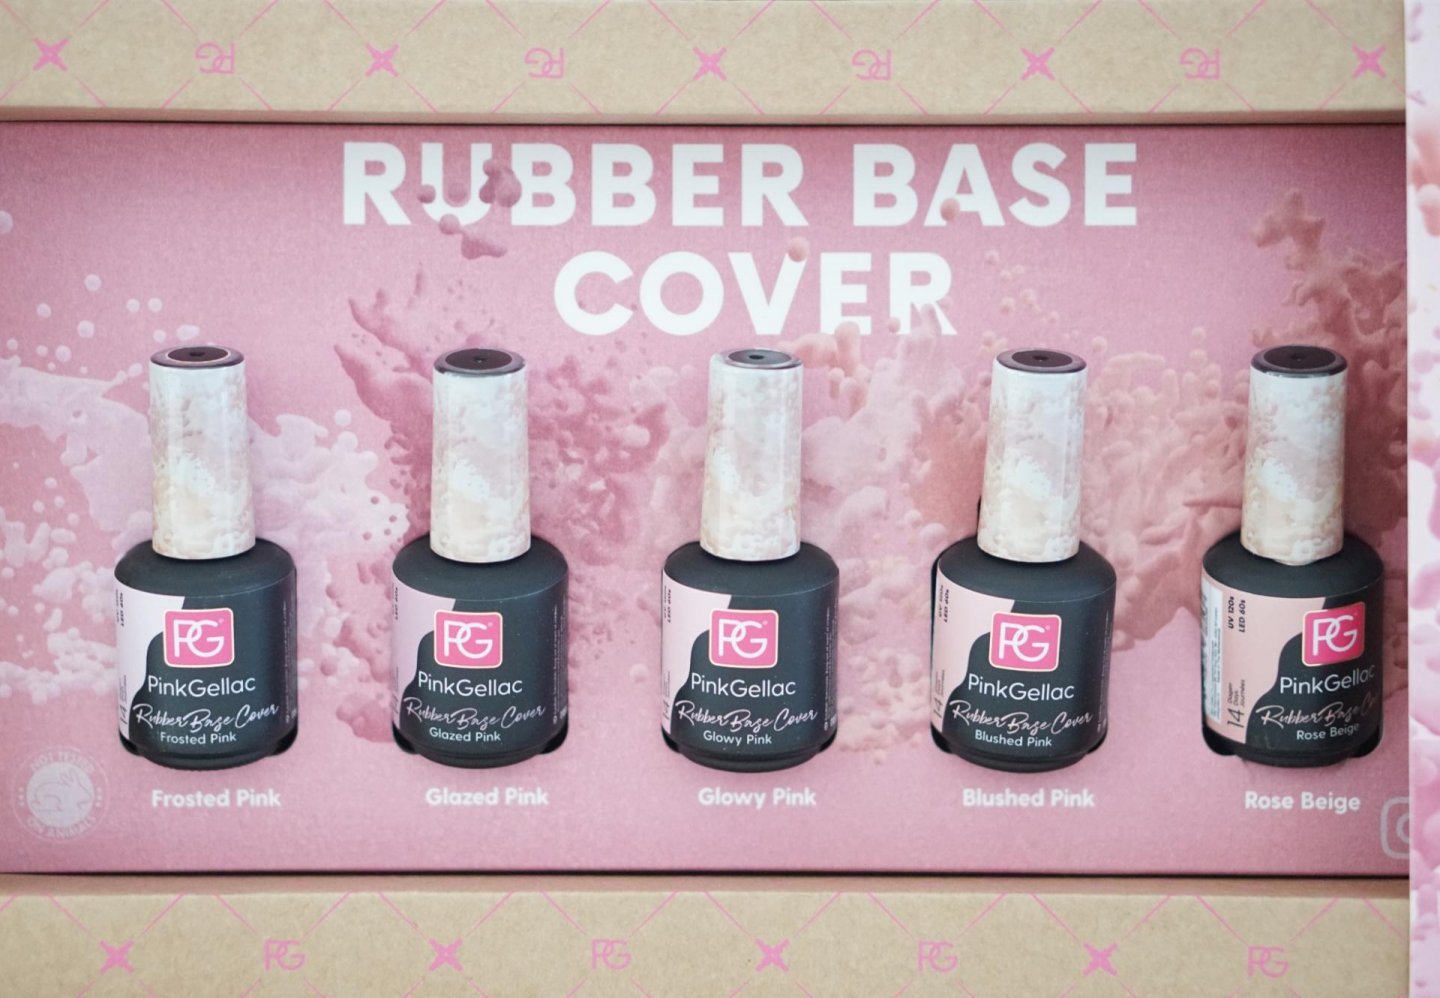 Pink Gellac Rubber Base Cover review